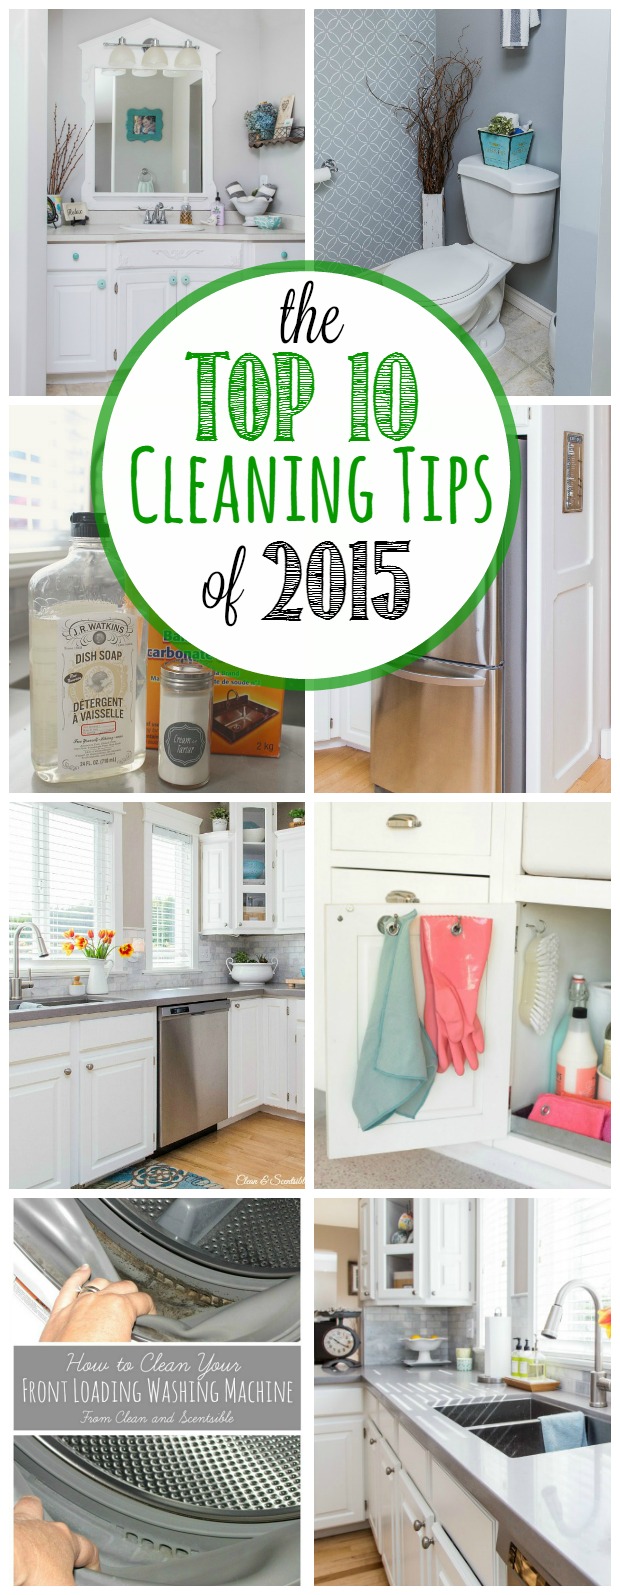 https://www.cleanandscentsible.com/wp-content/uploads/2015/12/Top-10-Cleaning-Tips-2015.jpg